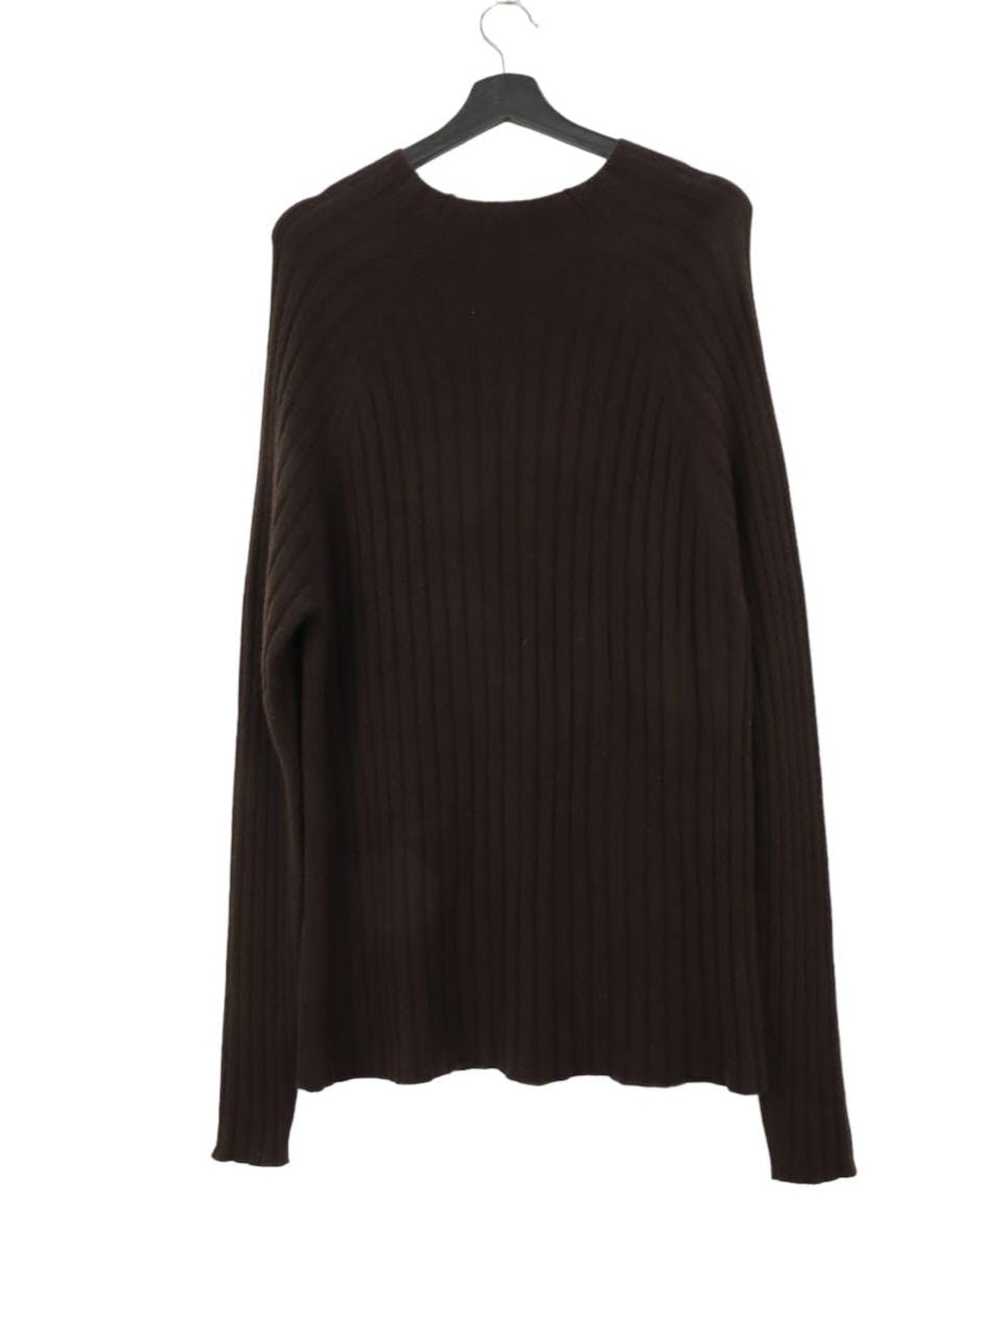 Burberry × Cashmere & Wool Burberry London Knit C… - image 1